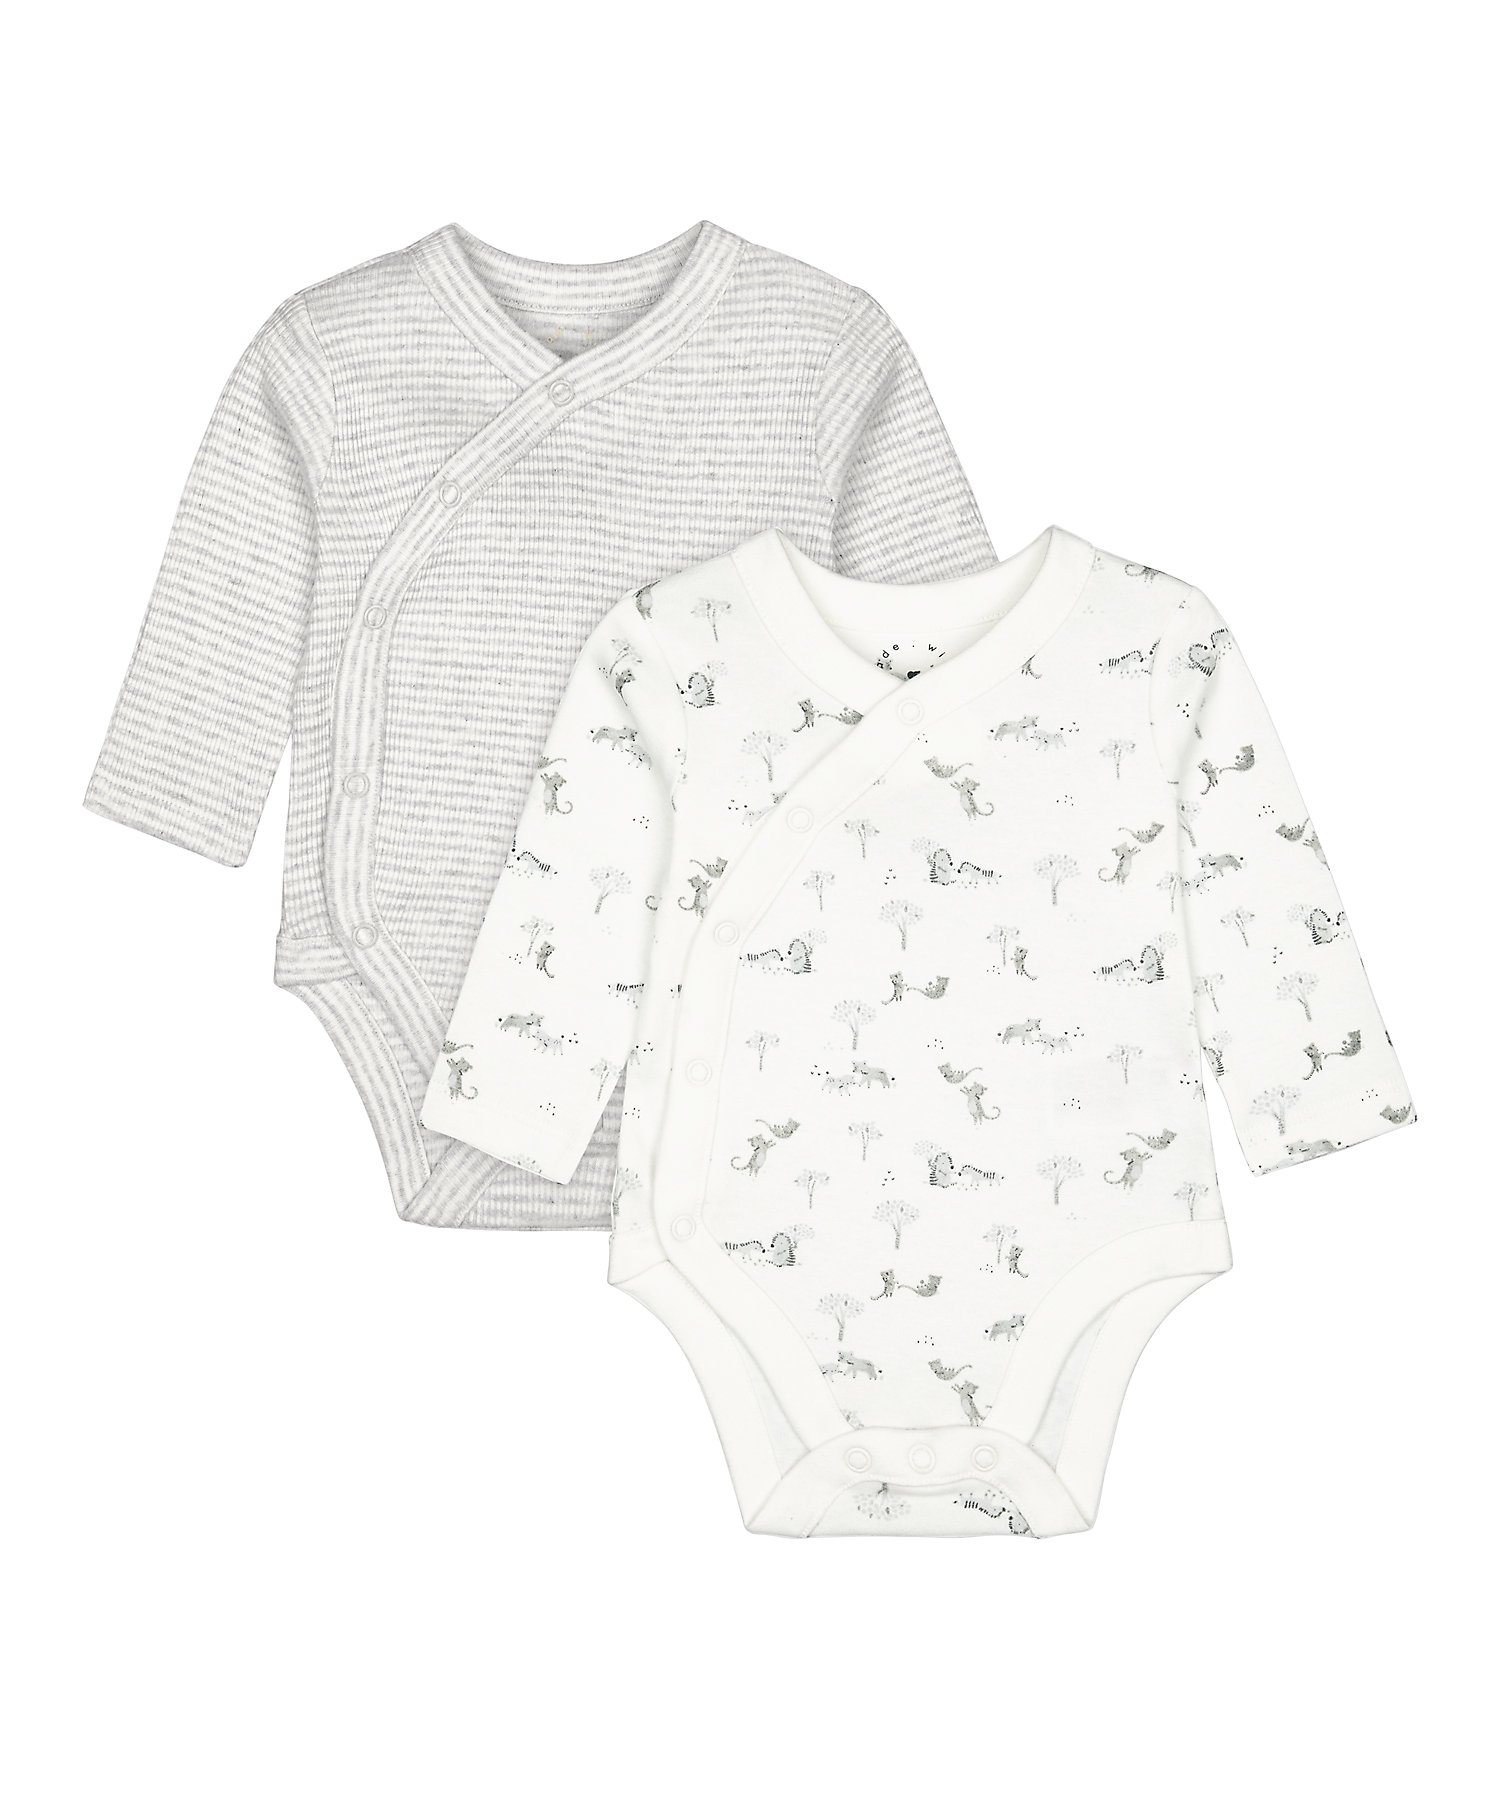 Mothercare | Unisex Full Sleeves Bodysuit Adorable Prints-Pack of 2-Grey